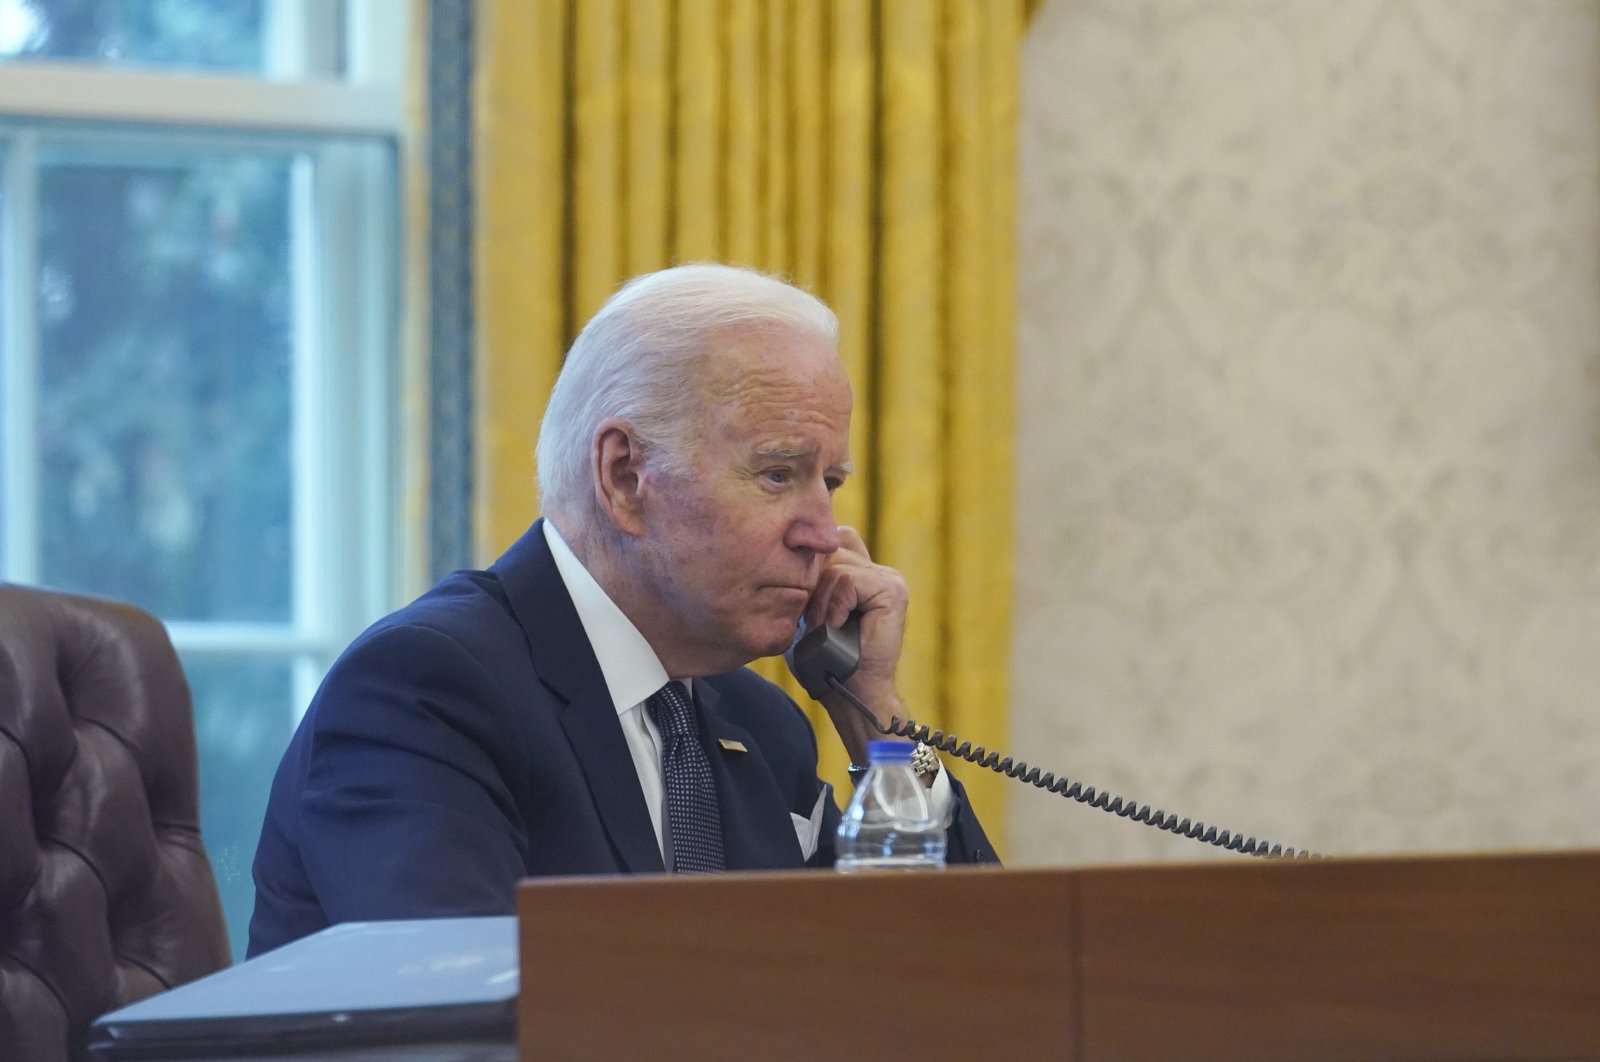 In this image made through a window, President Joe Biden talks on the phone with Ukrainian President Volodymyr Zelenskyy from the Oval Office of the White House in Washington, U.S., Dec. 9, 2021. (AP Photo)